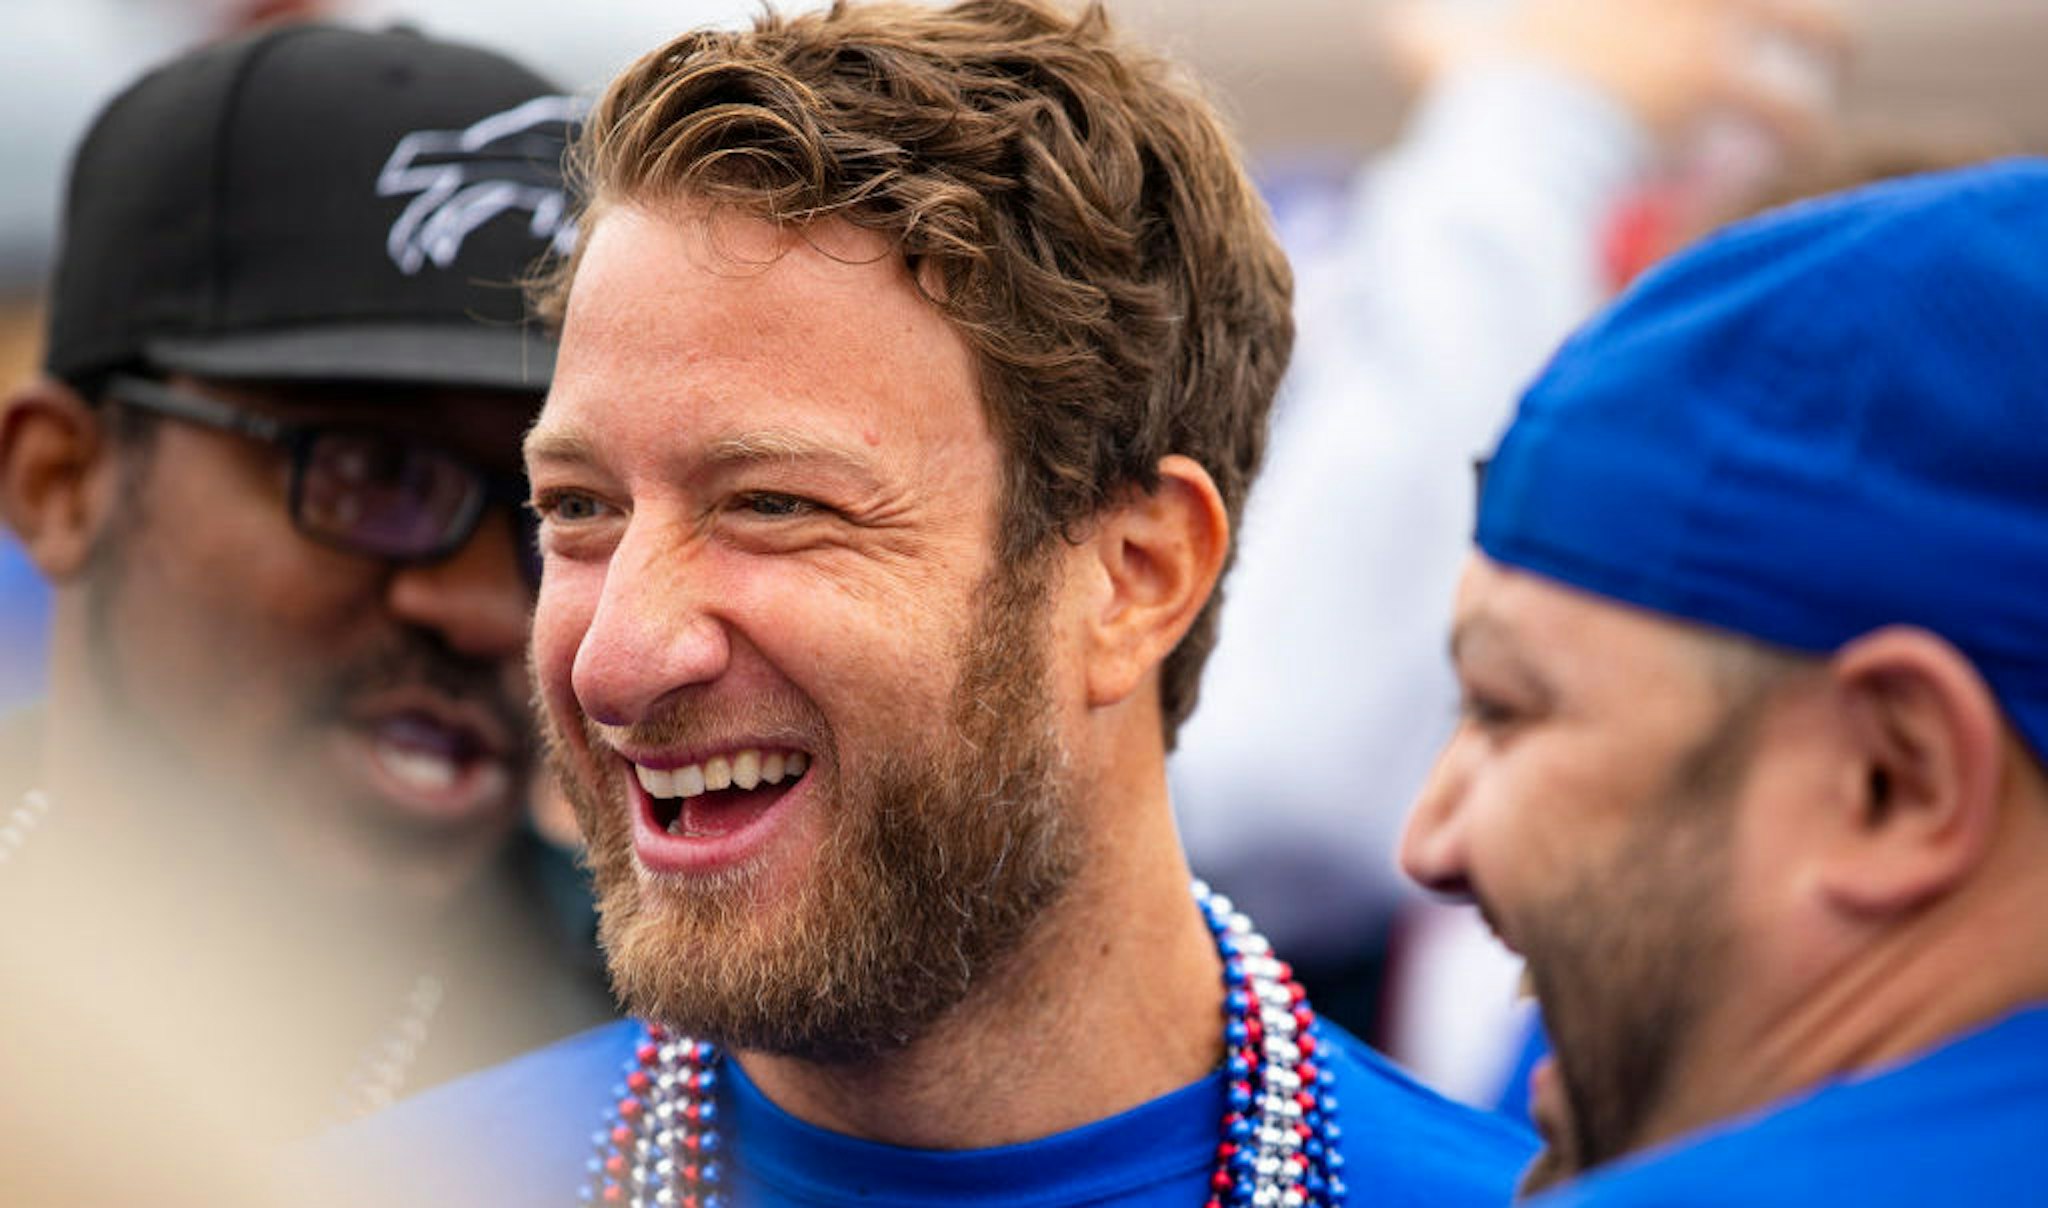 ORCHARD PARK, NY - SEPTEMBER 29: Barstool Sports founder Dave Portnoy attends a Buffalo Bills tailgate before the game against the New England Patriots at New Era Field on September 29, 2019 in Orchard Park, New York. New England defeats Buffalo 16-10. (Photo by Brett Carlsen/Getty Images) *** Local Caption *** Dave Portnoy